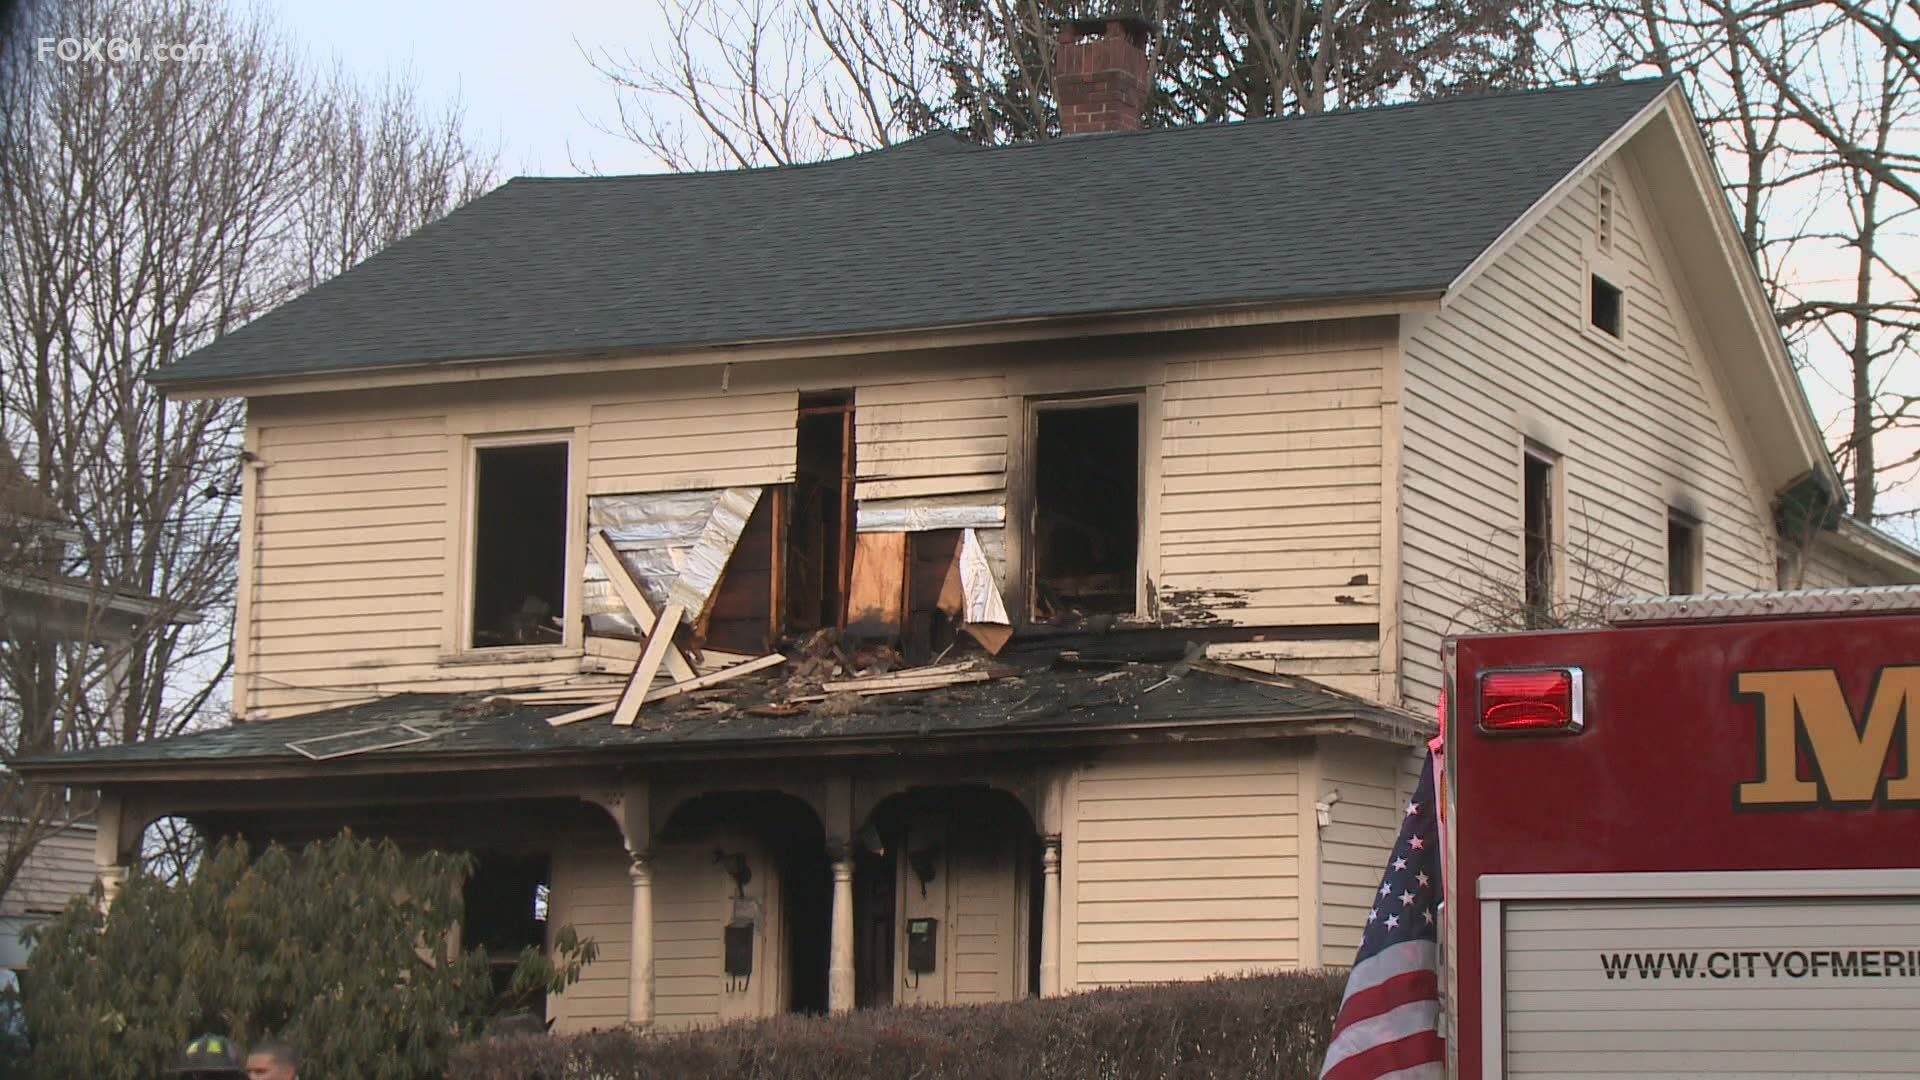 Eight people in the two-family home made it out safely; a firefighter was taken to the hospital for an ankle injury.